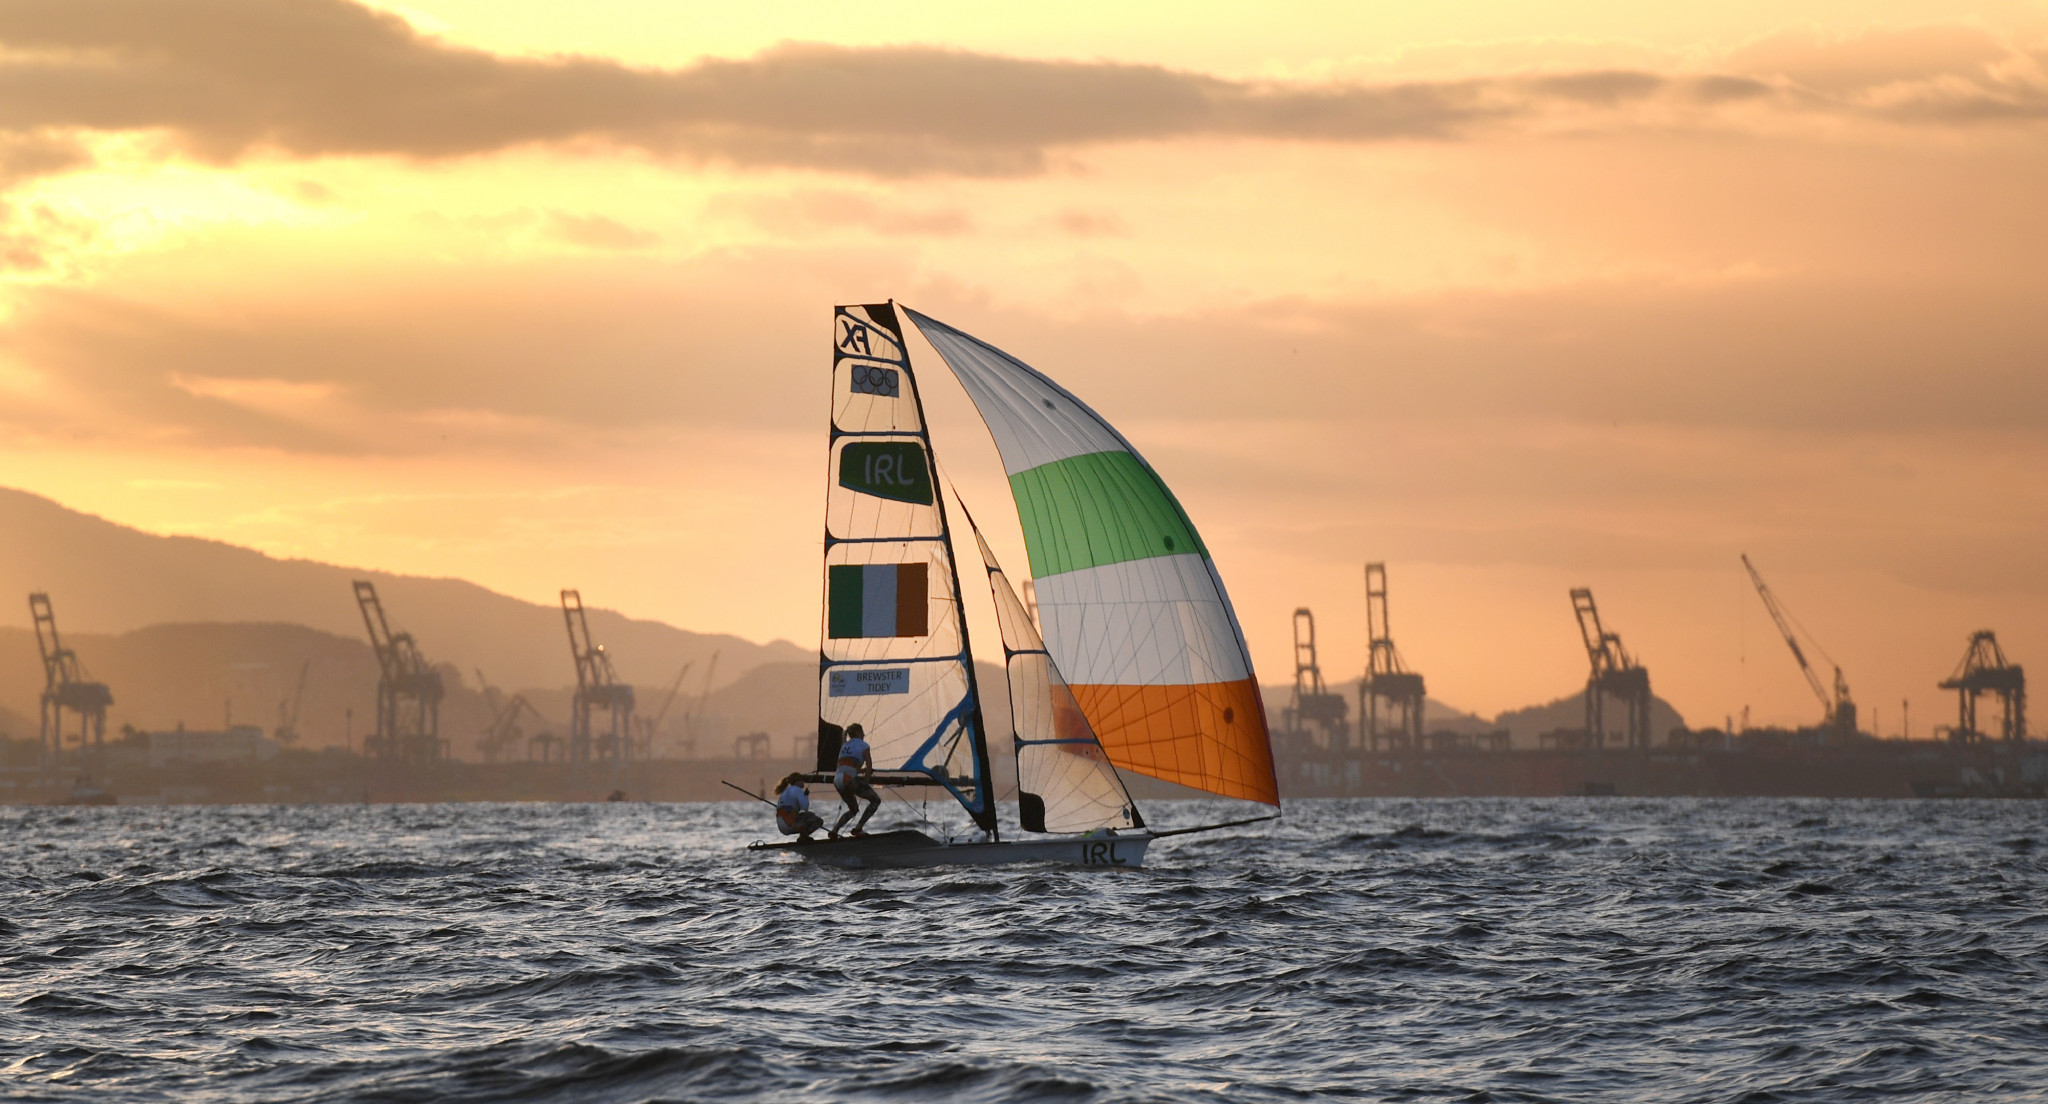 Irish pair Robert Dickson and Sean Waddilove strengthened their challenge for the final European place in the Tokyo 2020 49er class sailing event as a third place and a win kept them third overall at the Lanzarote International Regatta ©Getty Images